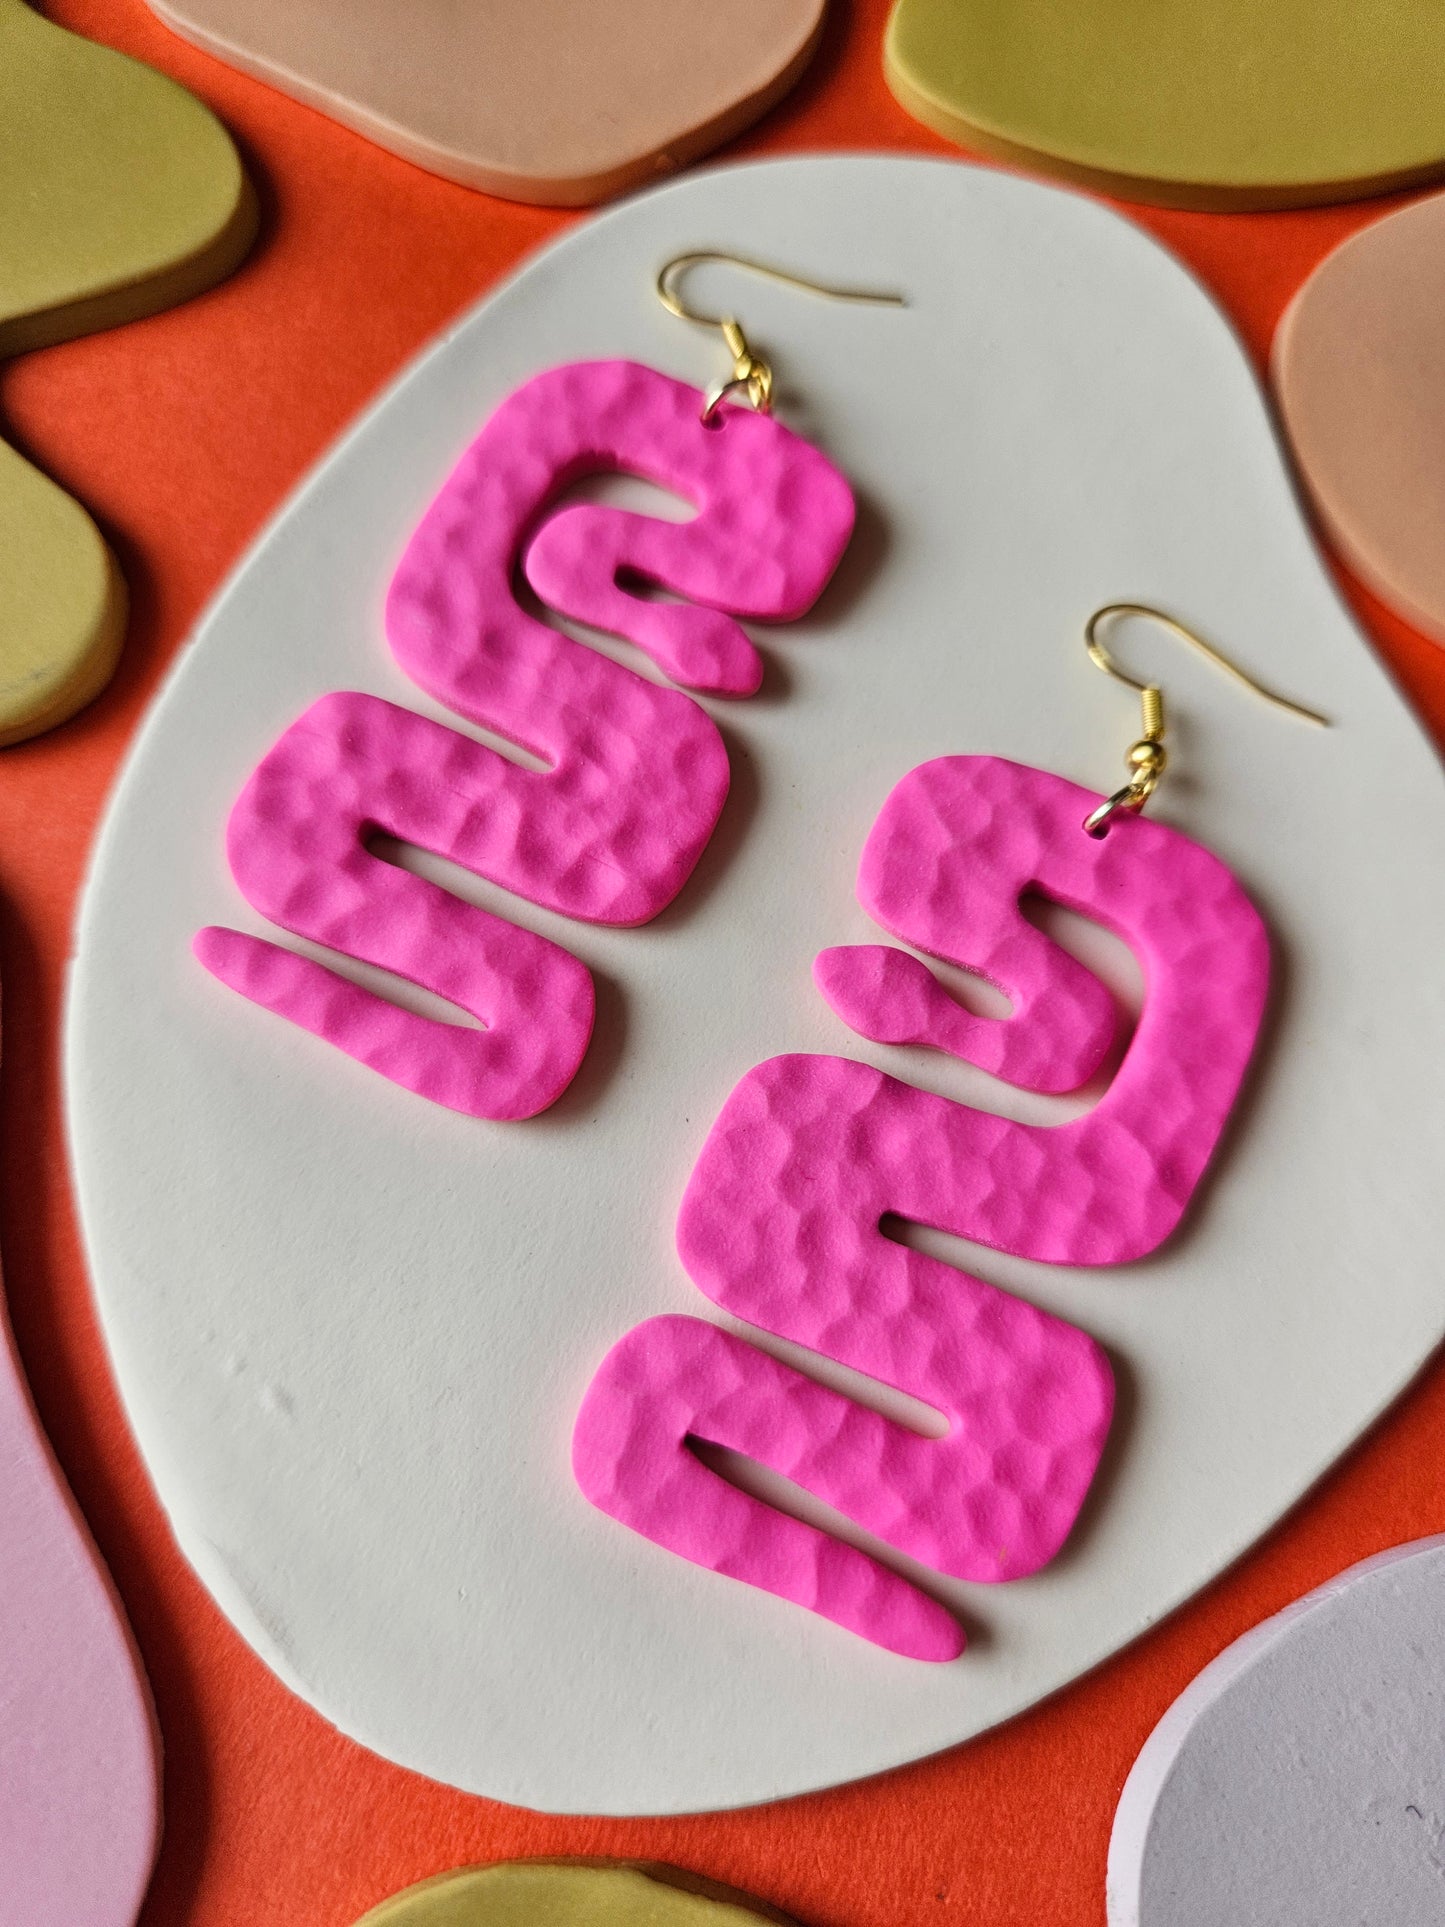 Oversized Snake Earrings in LMT ED Colors Pink + Speckled Pear Polymer Clay Earrings